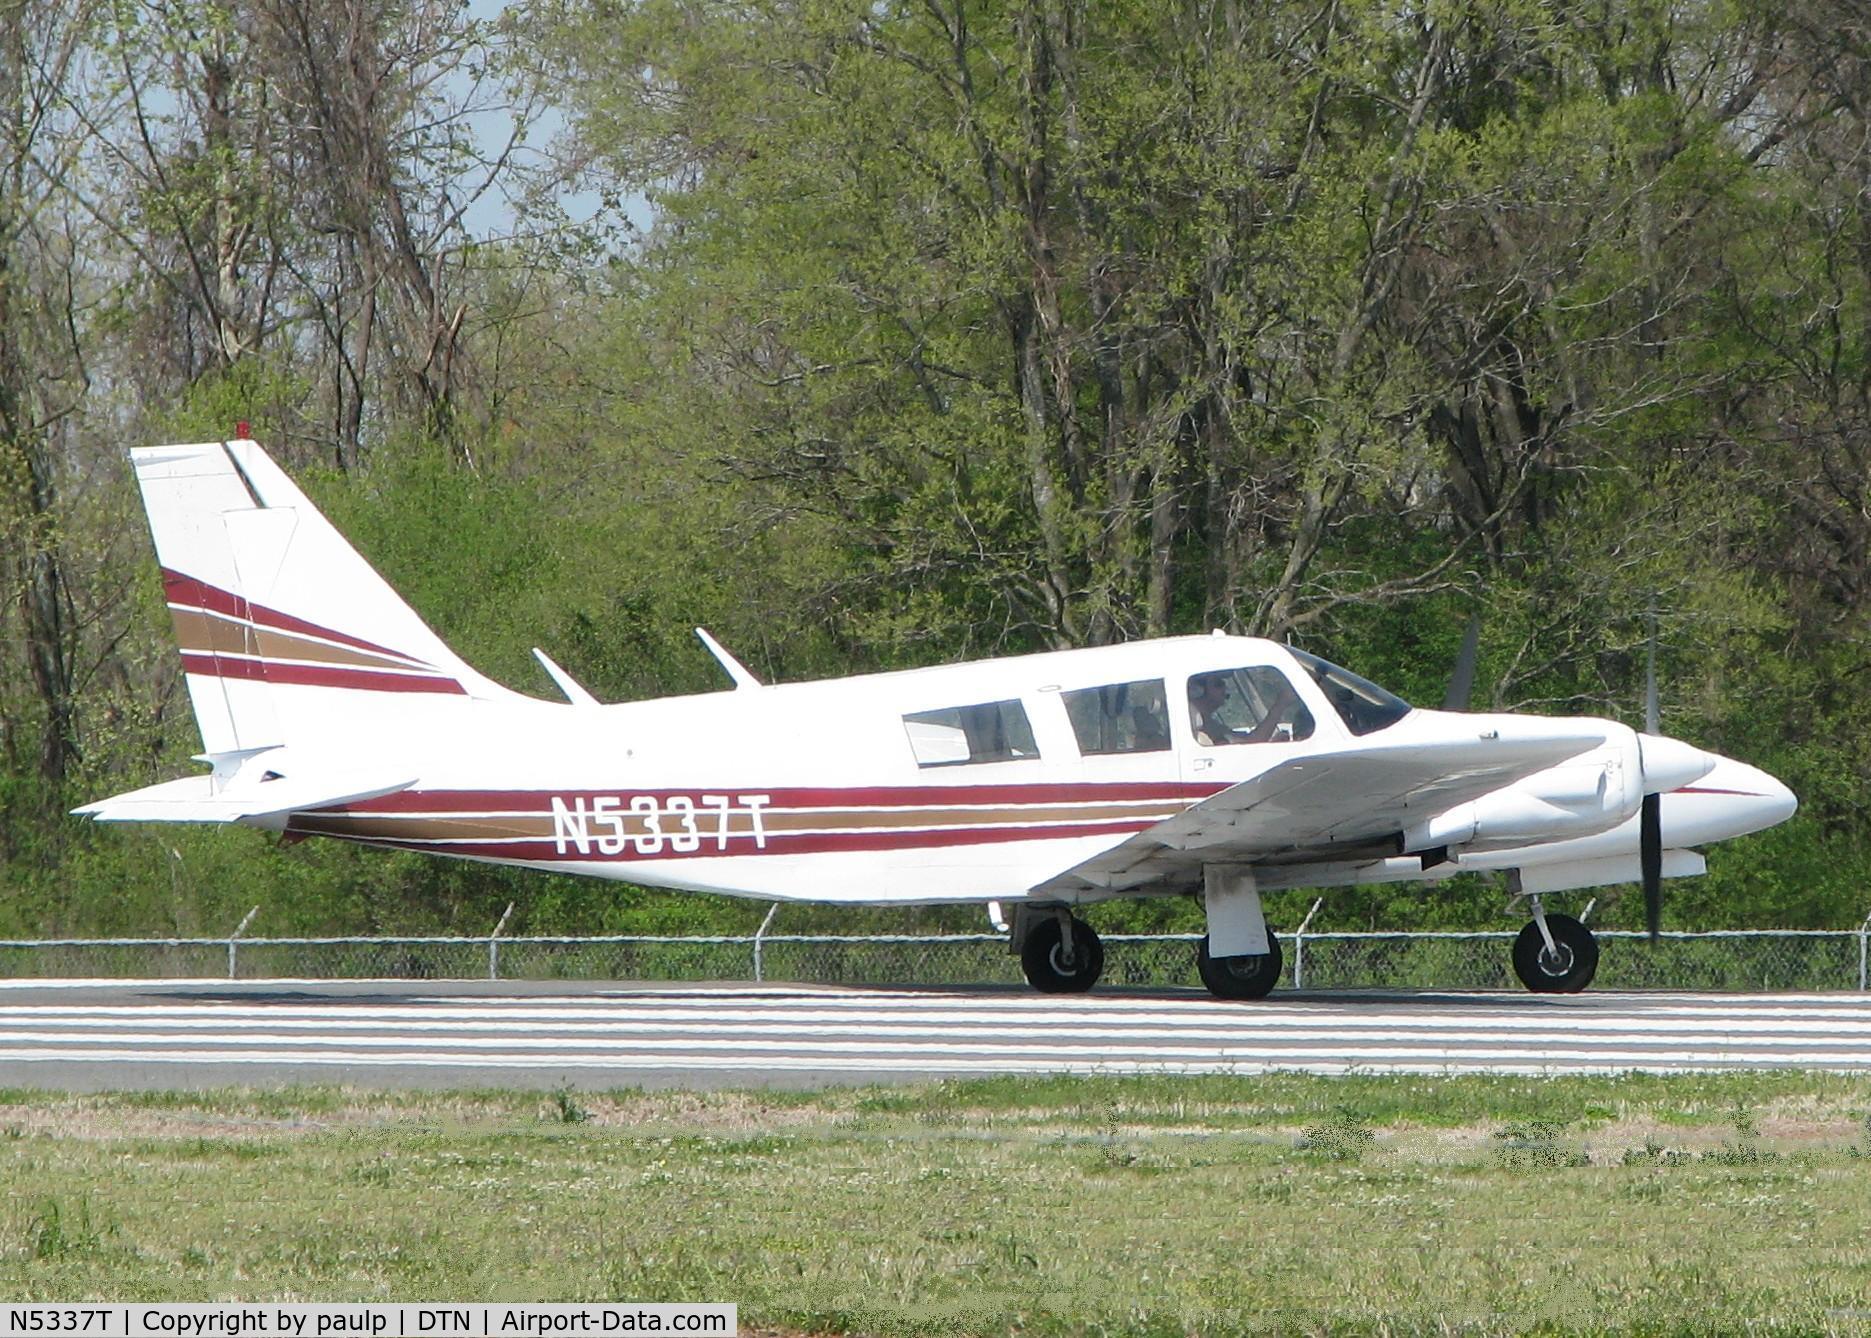 N5337T, 1972 Piper PA-34-200 Seneca C/N 34-7250249, Turning onto runway 14 at the Shreveport Downtown airport.